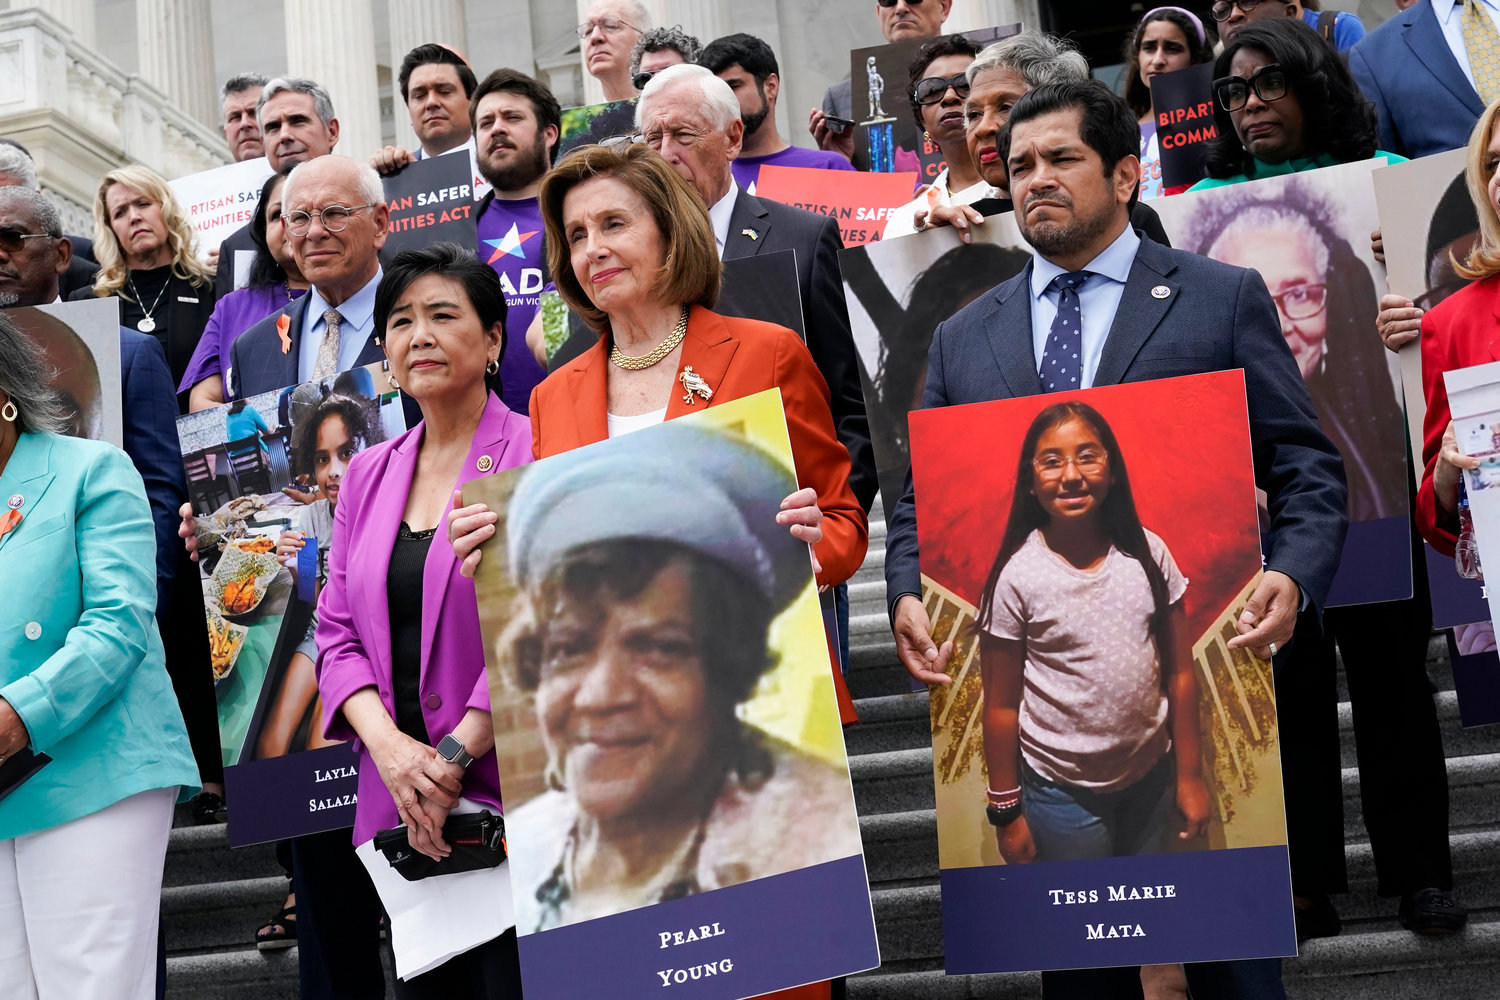 House Speaker Nancy Pelosi of Calif., and other lawmakers, talk about the gun violence bill at the Capitol in Washington Friday. At left is Rep. Judy Chu, D-Calif., and at right is Rep. Jimmy Gomez, D-Calif.